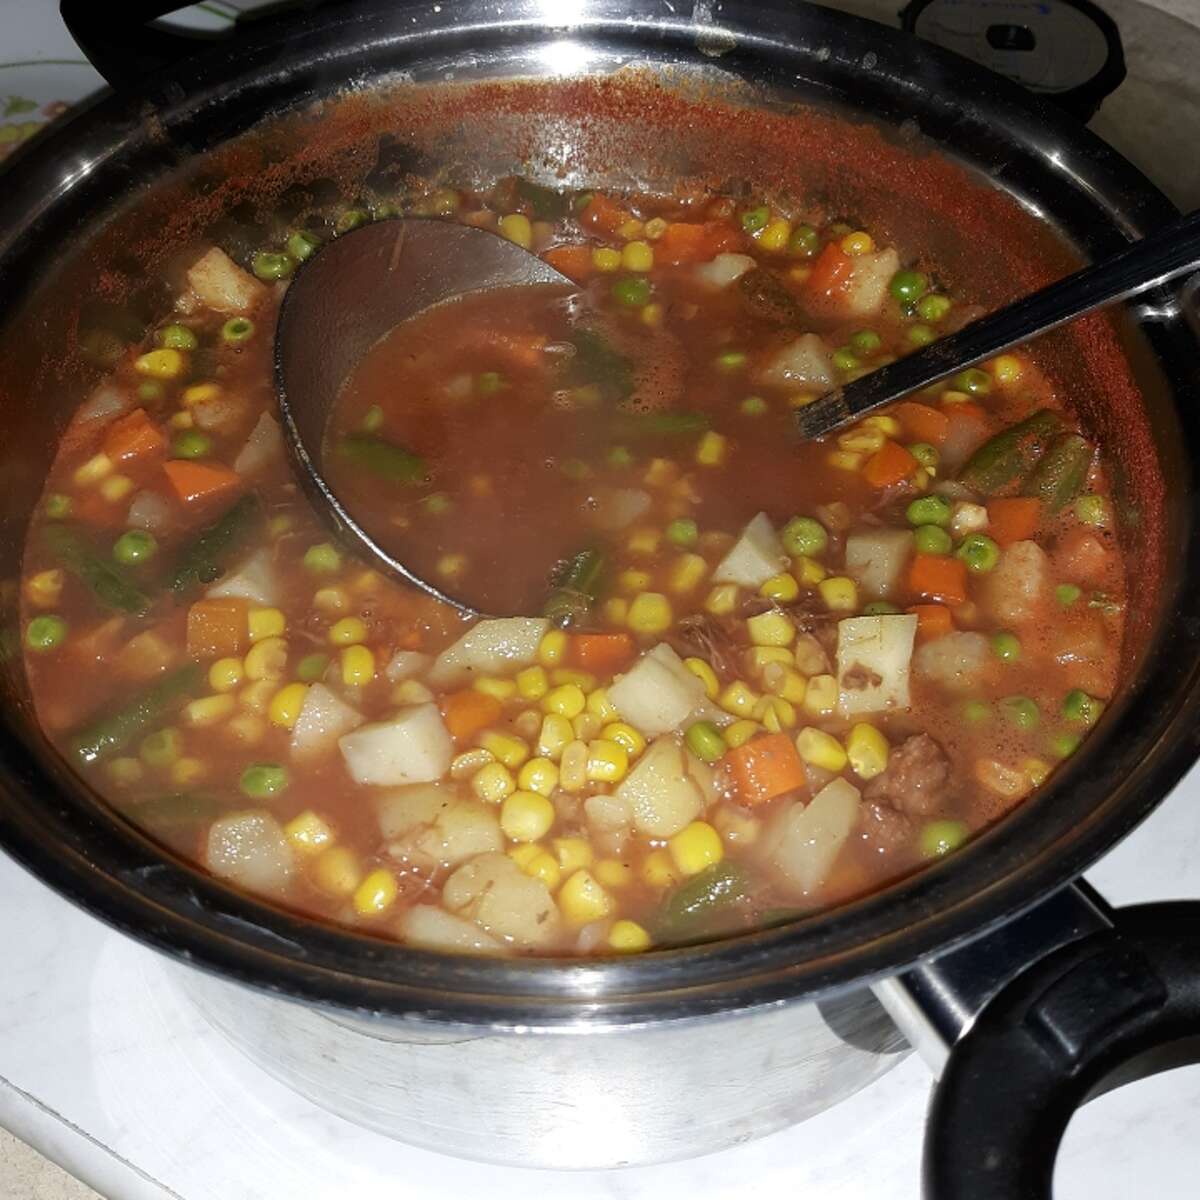 Lovina shares a recipe for vegetable soup in this week's Amish Kitchen.